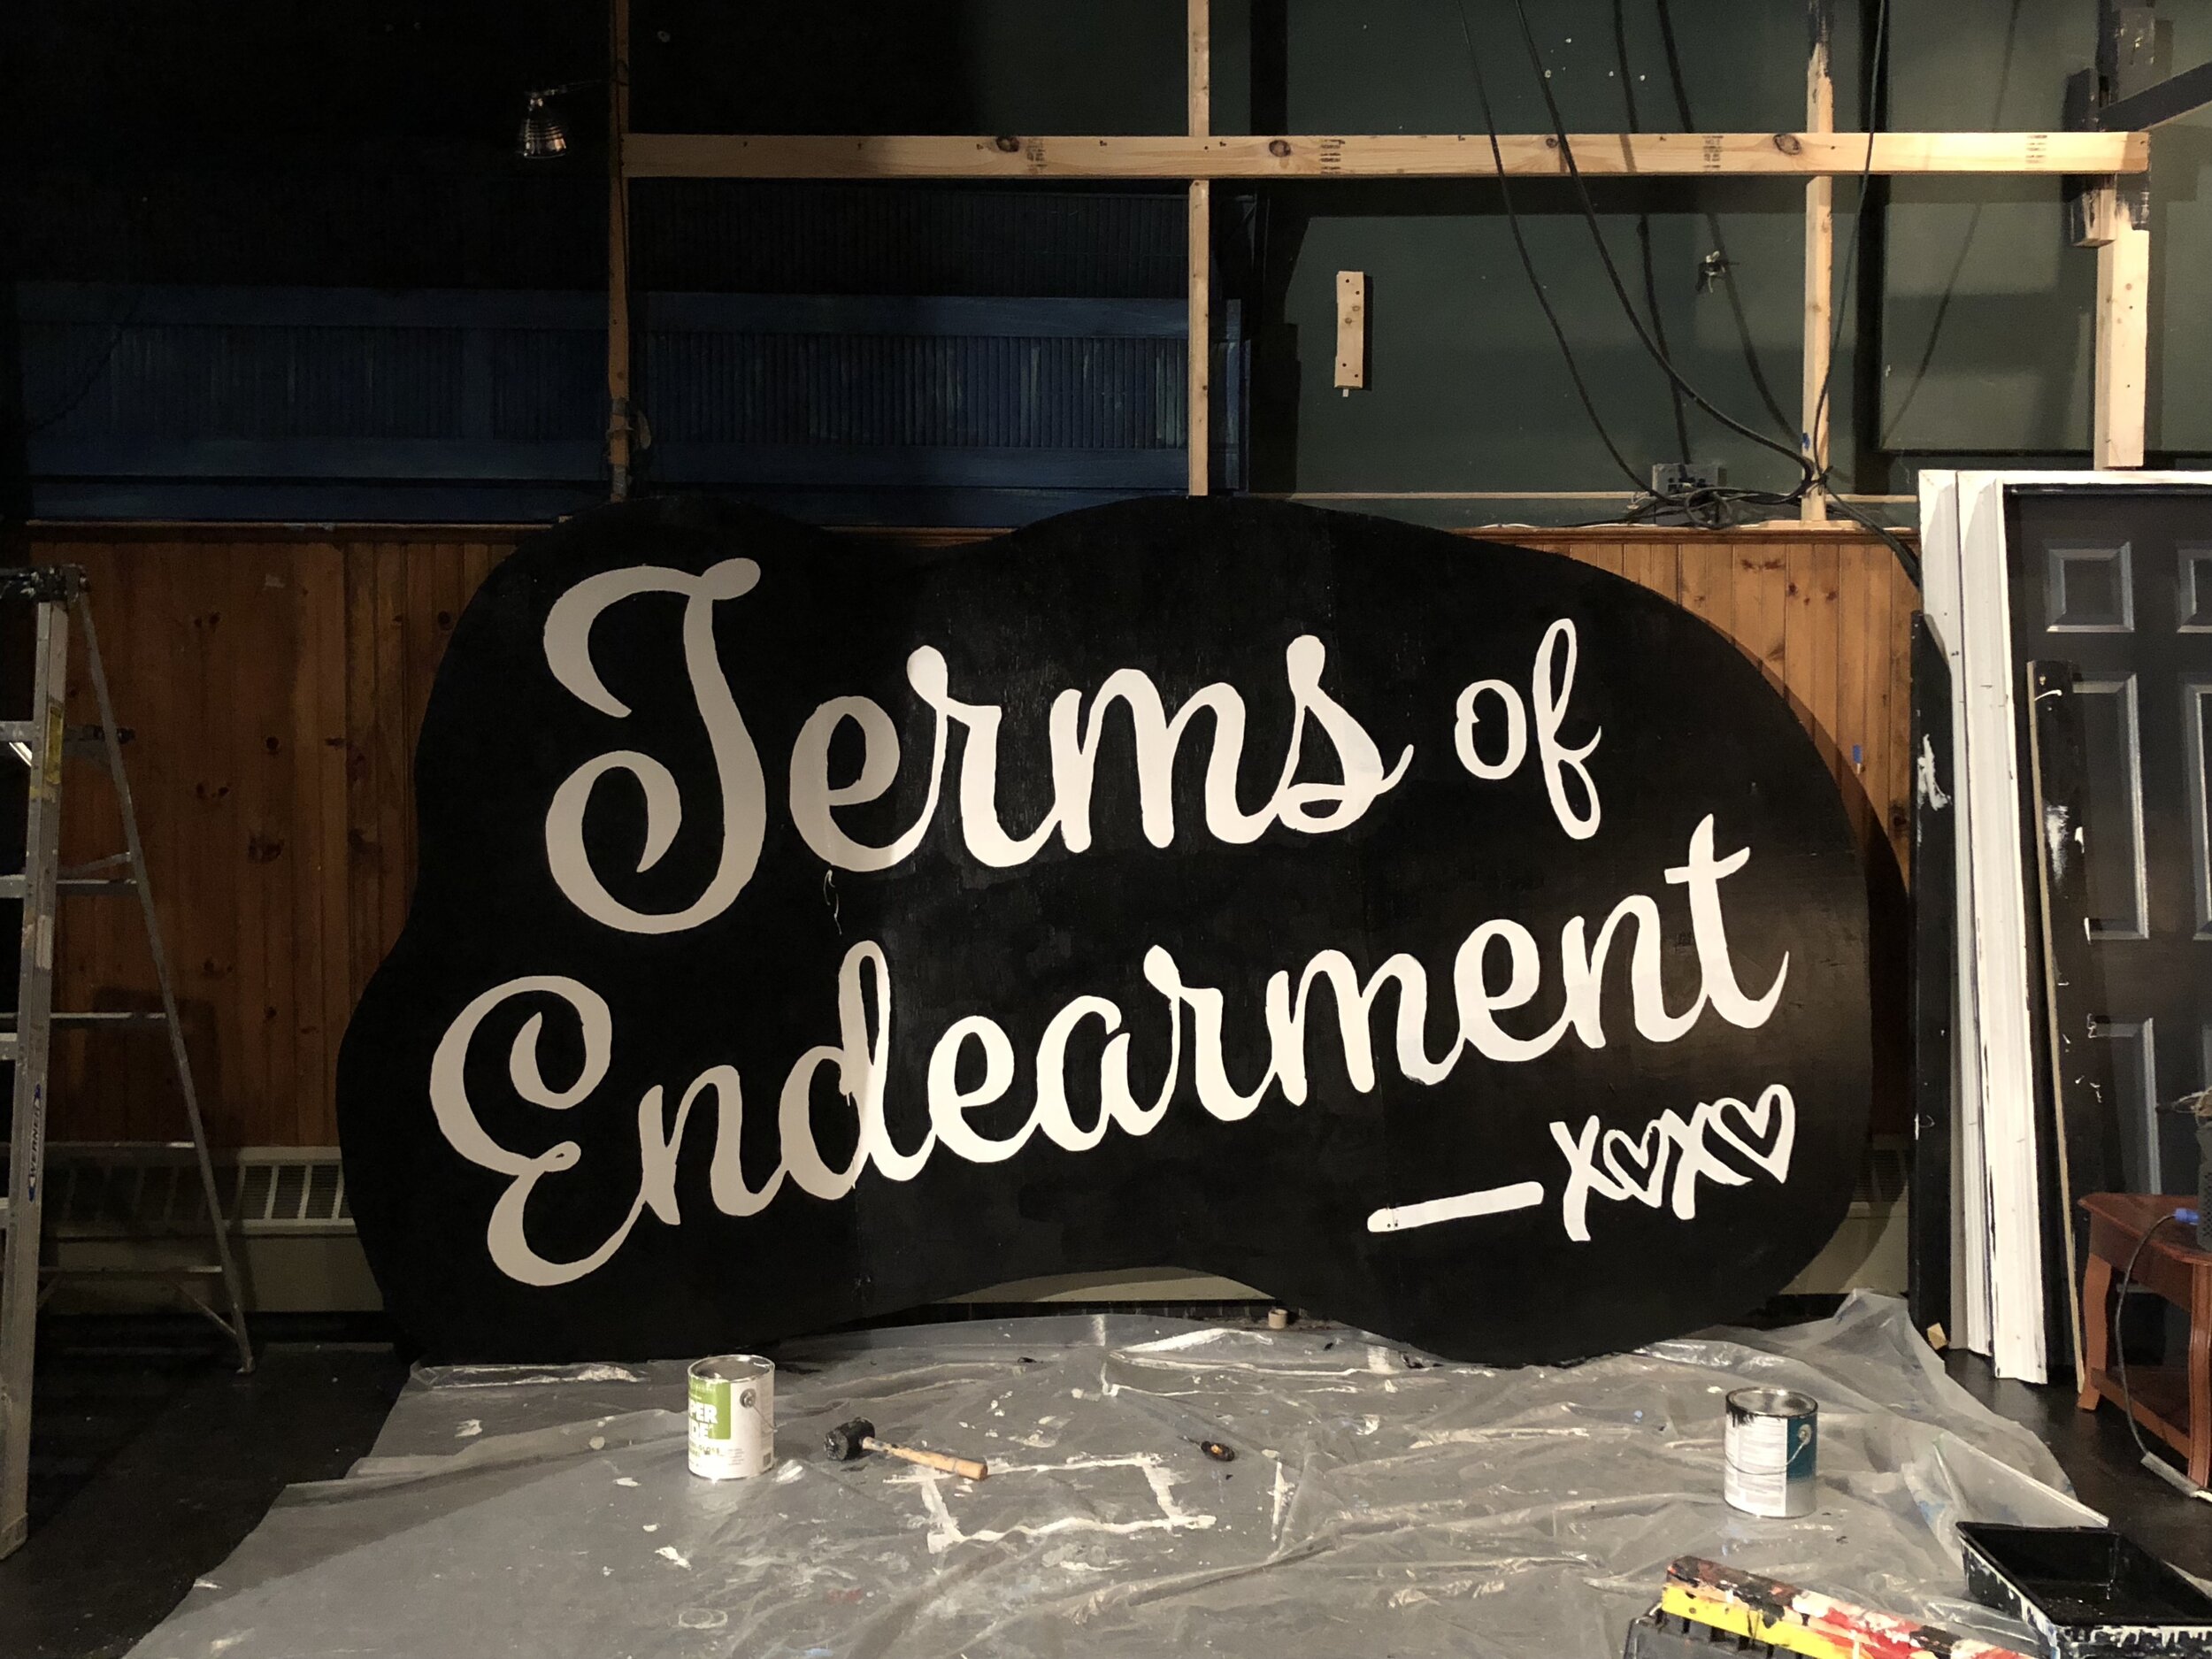  Progress Photo 2/3.  Terms of Endearment  (Staged Reading) Theatre Workshop of Nantucket 2018. [Production Designer] 